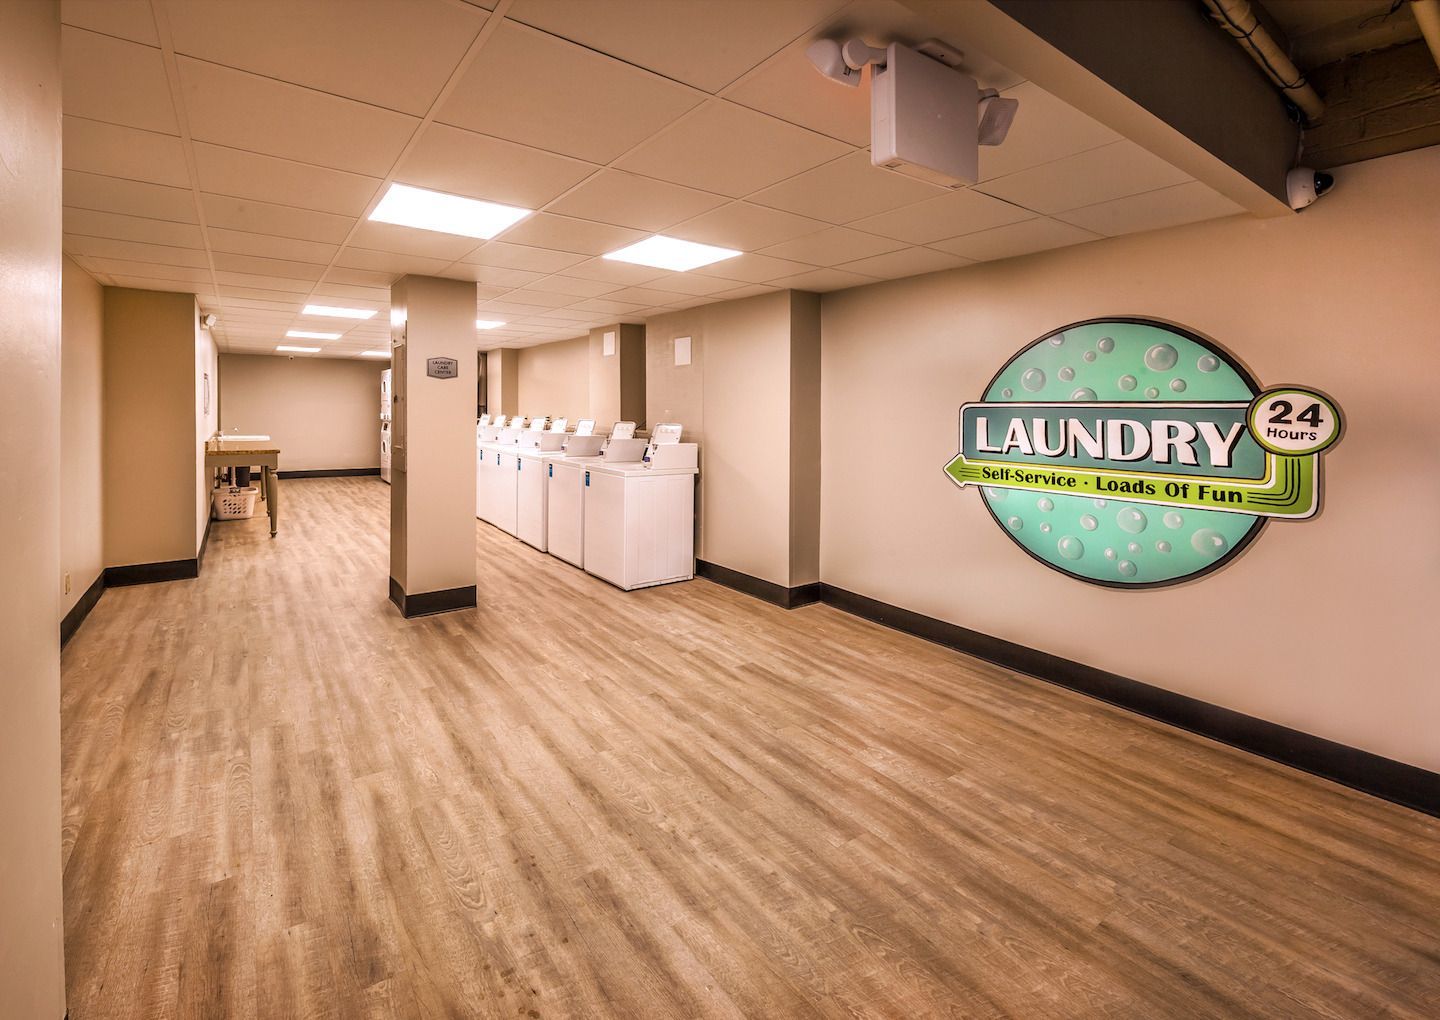 Laundry facility at Circle City in Indianapolis, IN.